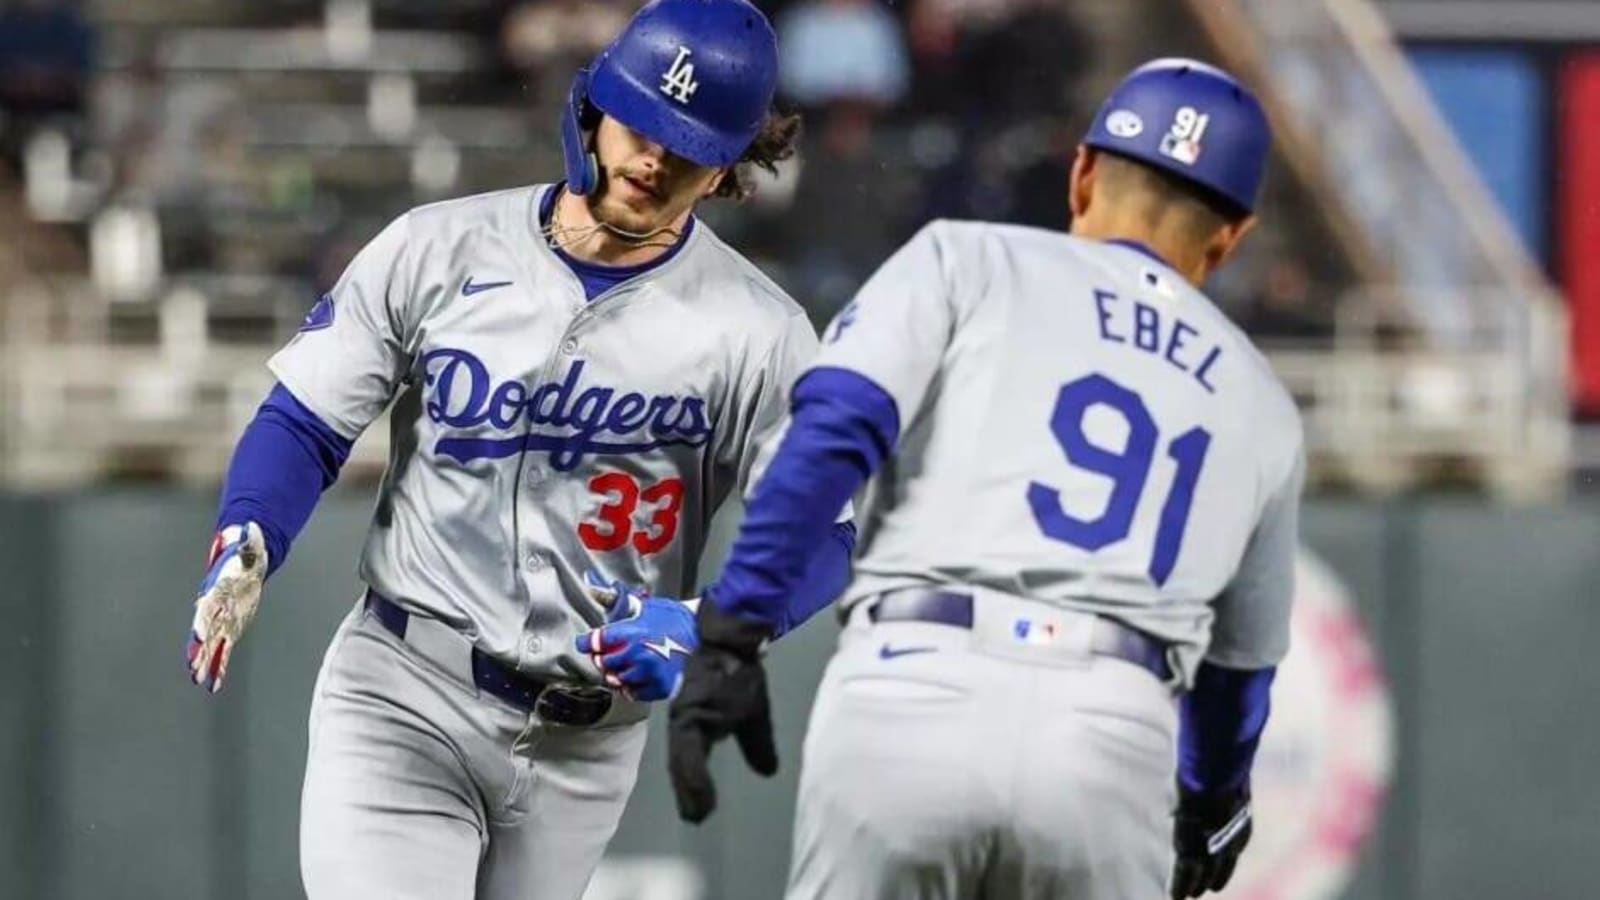 James Outman: Too Early In Dodgers Season ‘To be Super Frustrated’